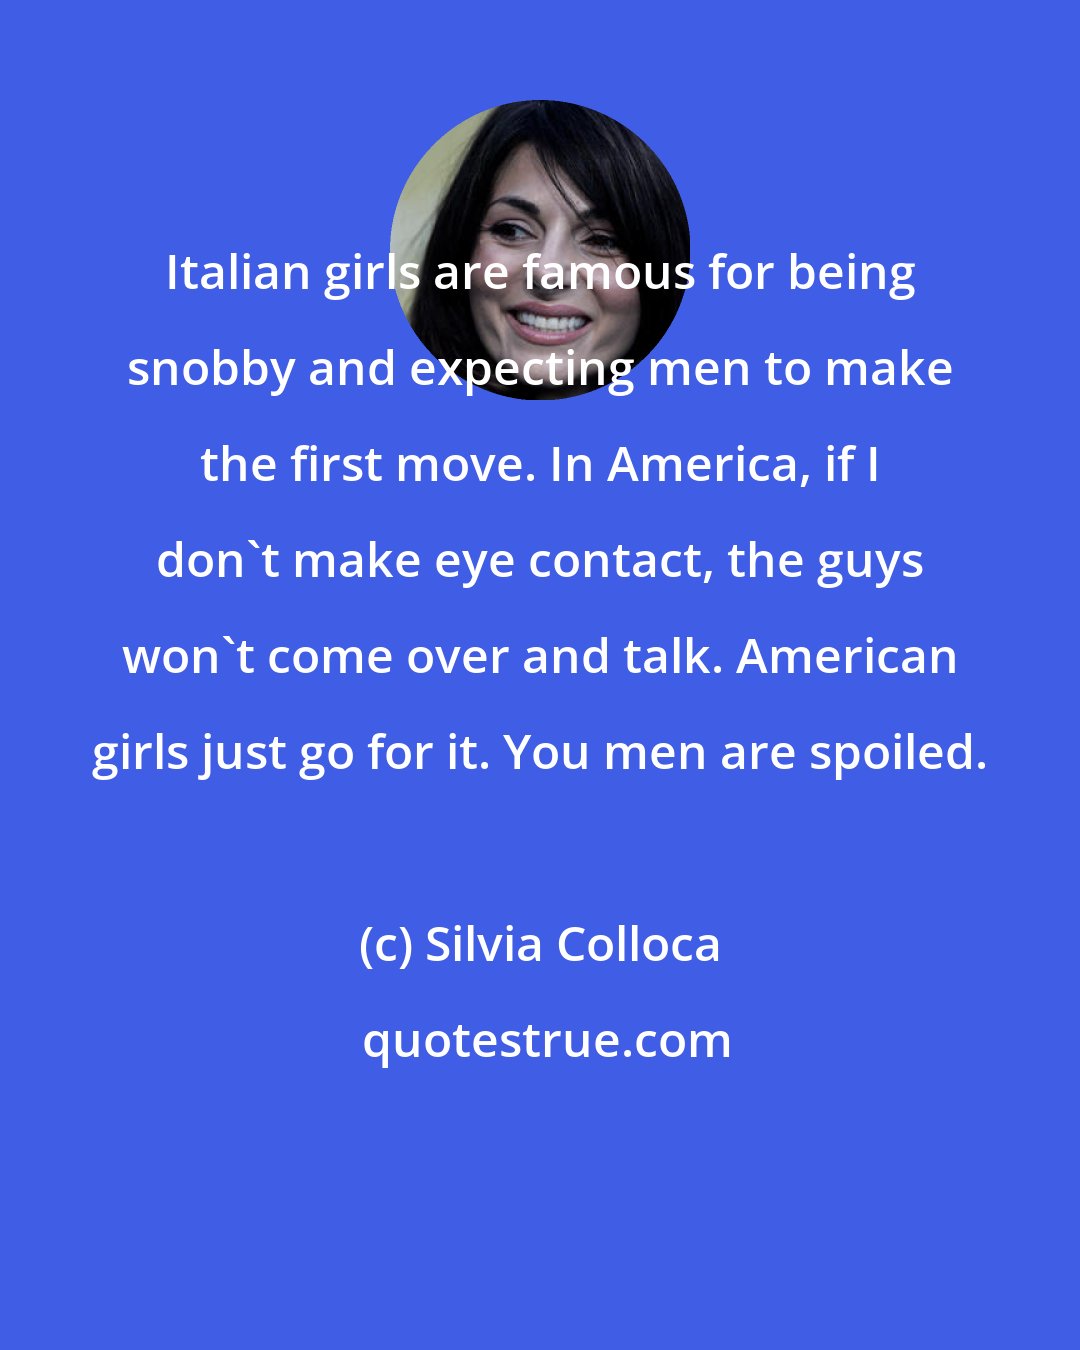 Silvia Colloca: Italian girls are famous for being snobby and expecting men to make the first move. In America, if I don't make eye contact, the guys won't come over and talk. American girls just go for it. You men are spoiled.